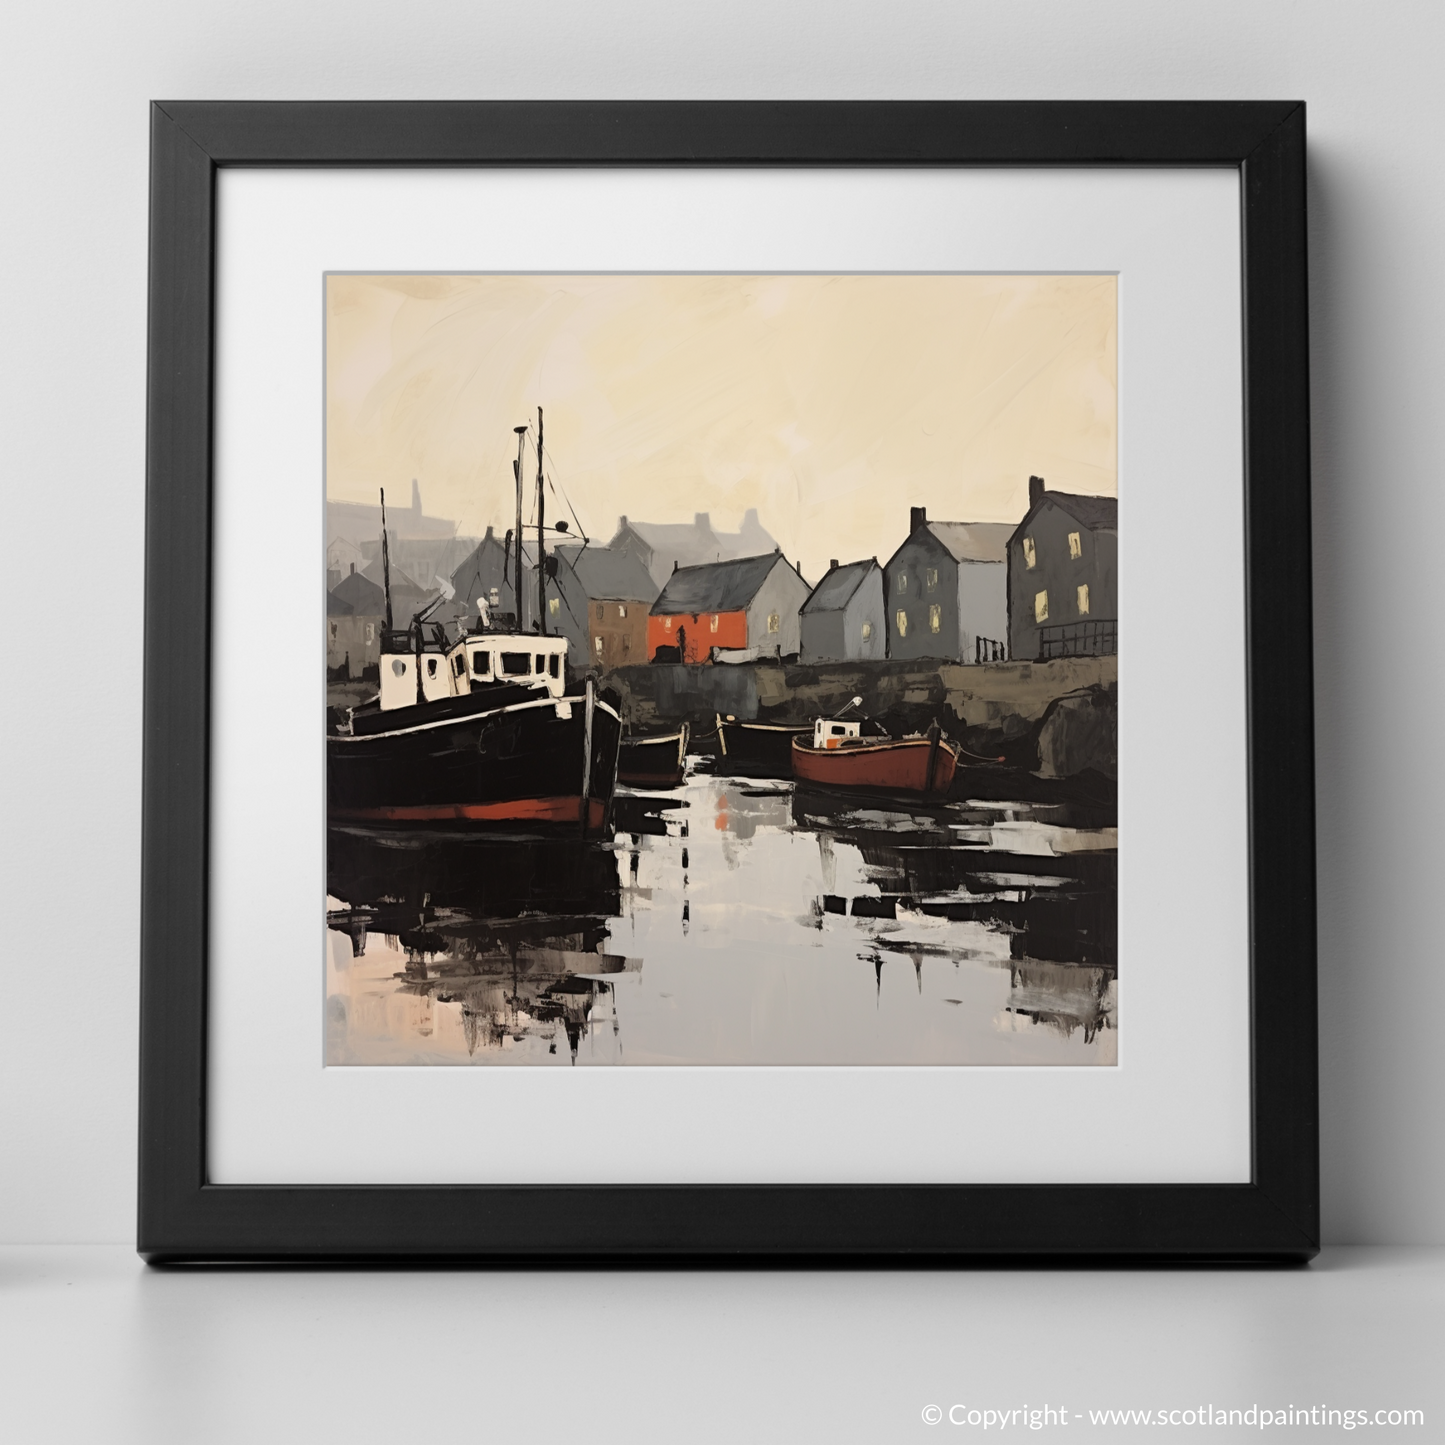 Art Print of Stornoway Harbour with a black frame